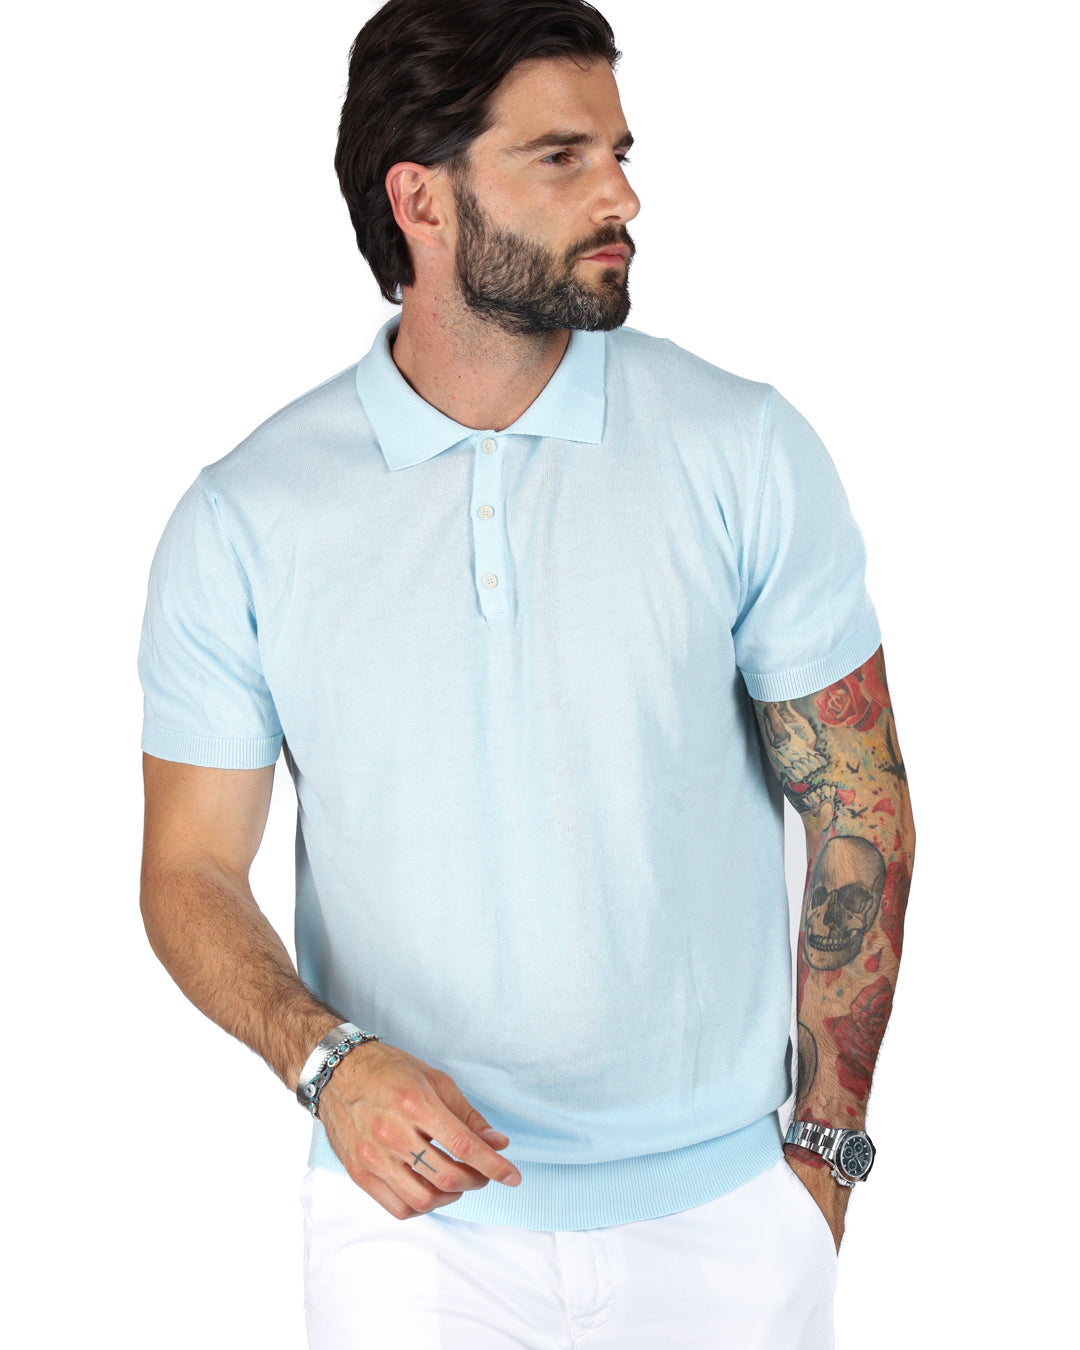 ROGER - BLUE KNITTED POLO SHIRT